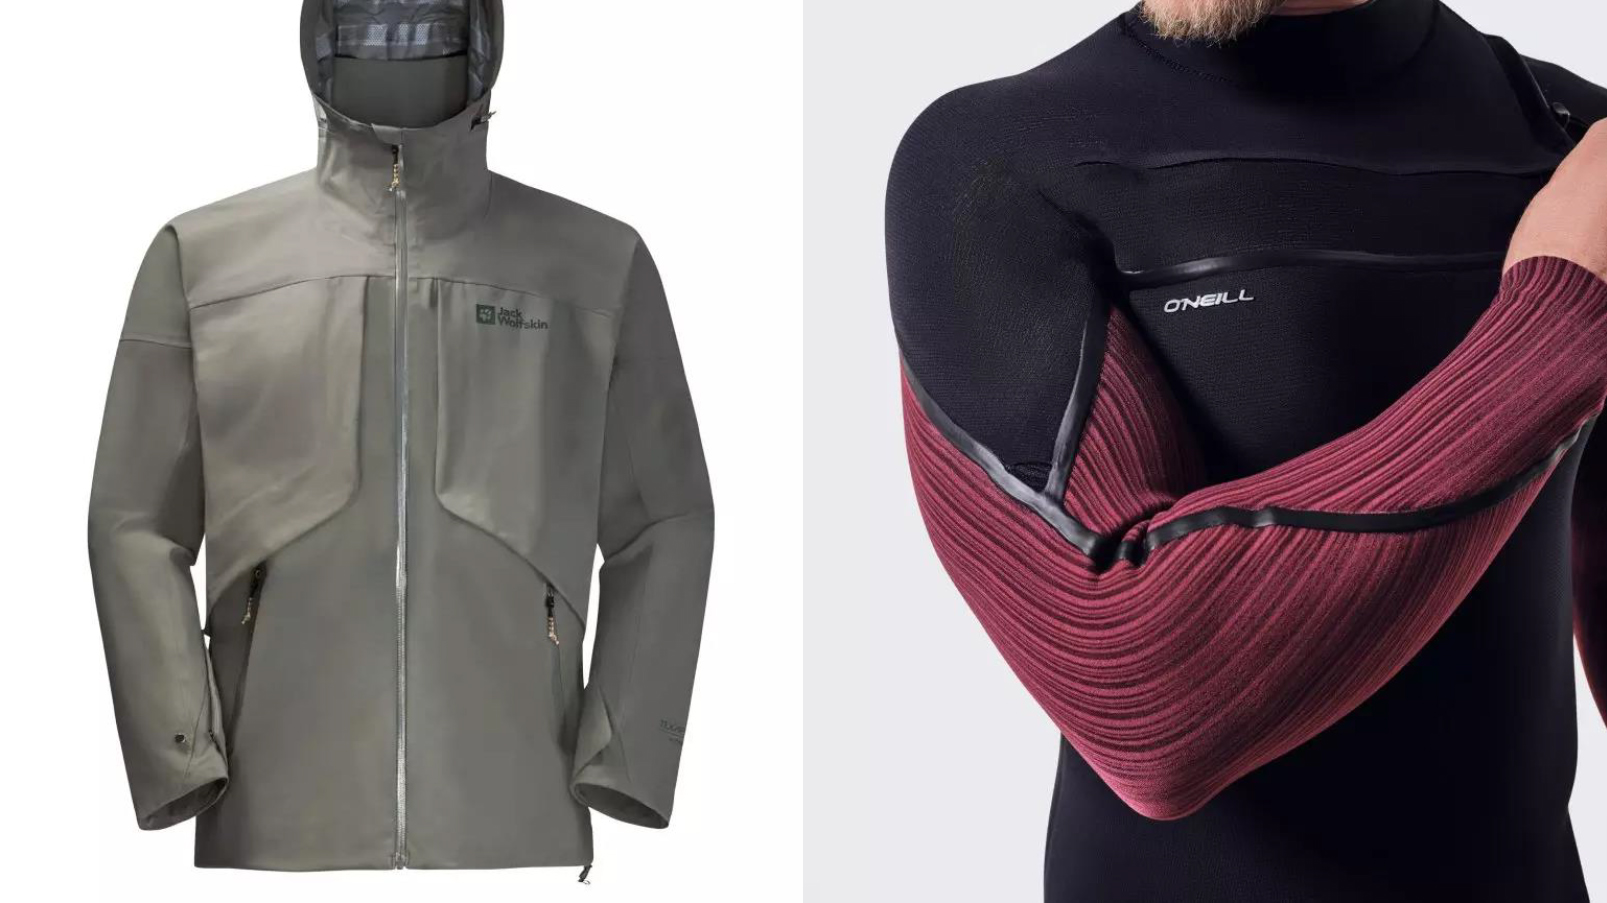 Jack Wolfskin’s Diskovera Jacket 3L and the Hyperfreak Fire wetsuit from O’Neill. © ISPO